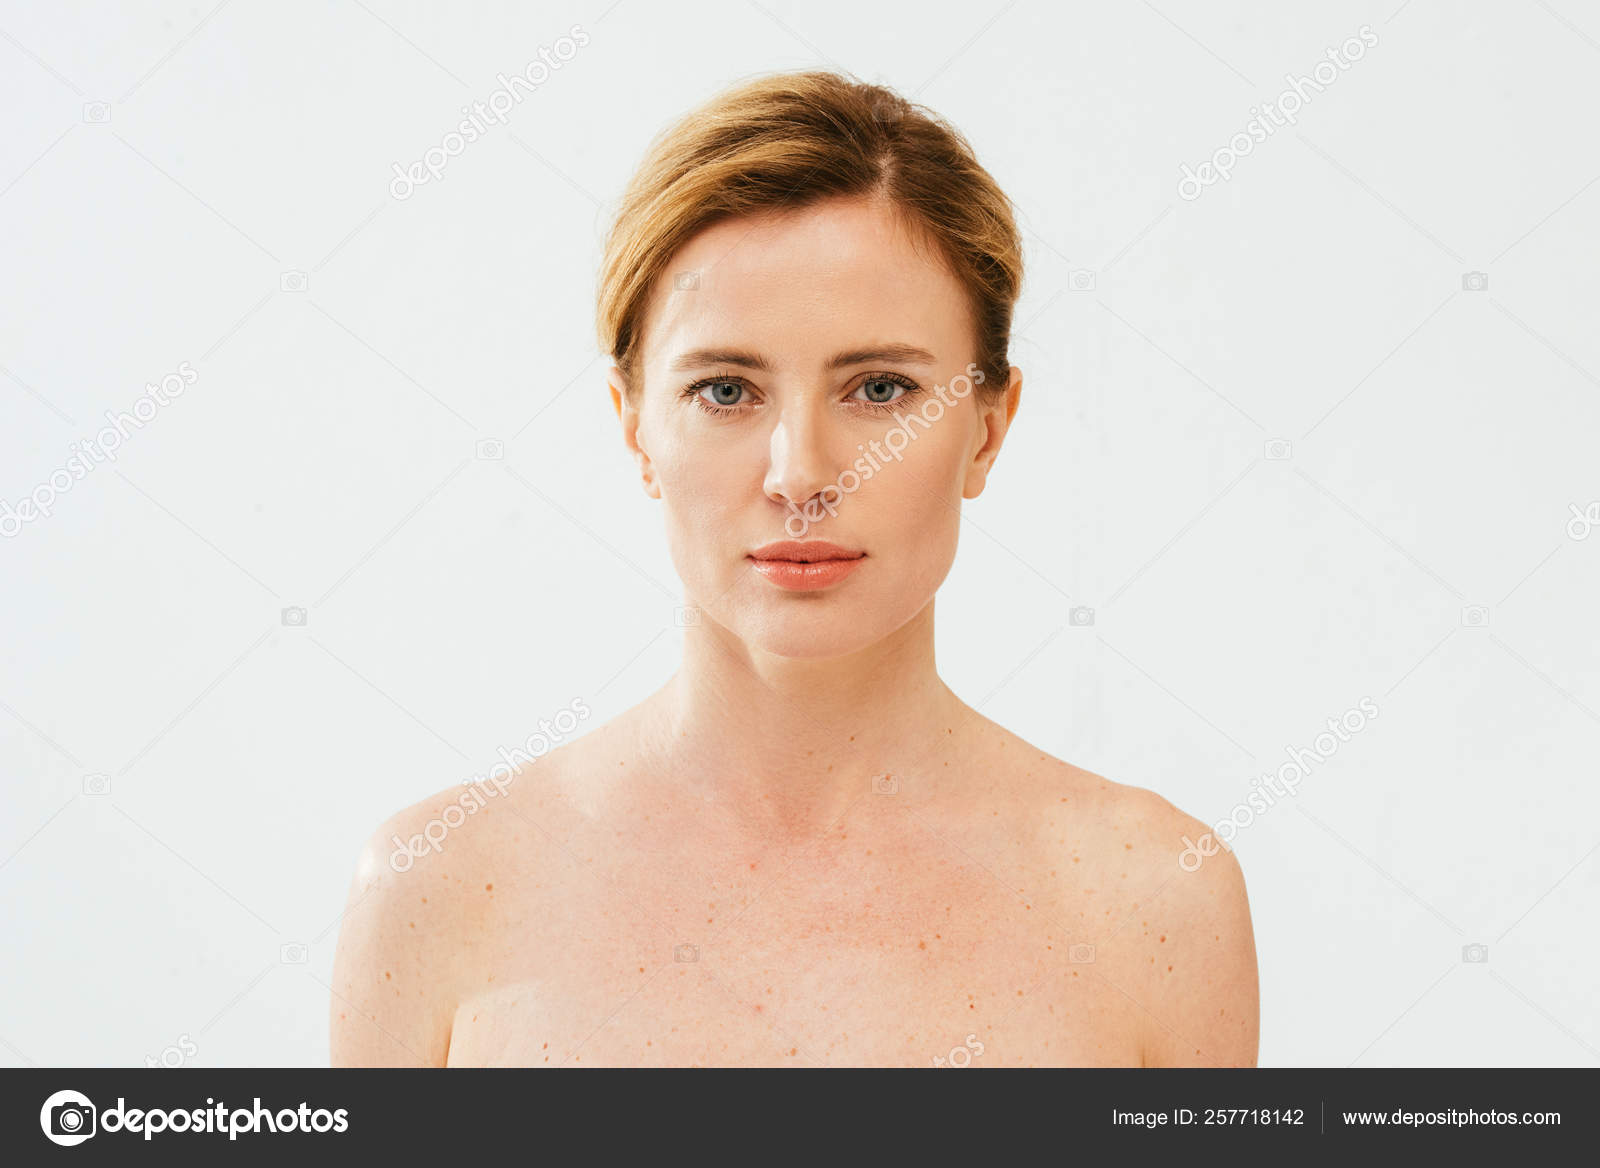 Naked Sick Woman Skin Illness Looking Camera White Stock Photo By